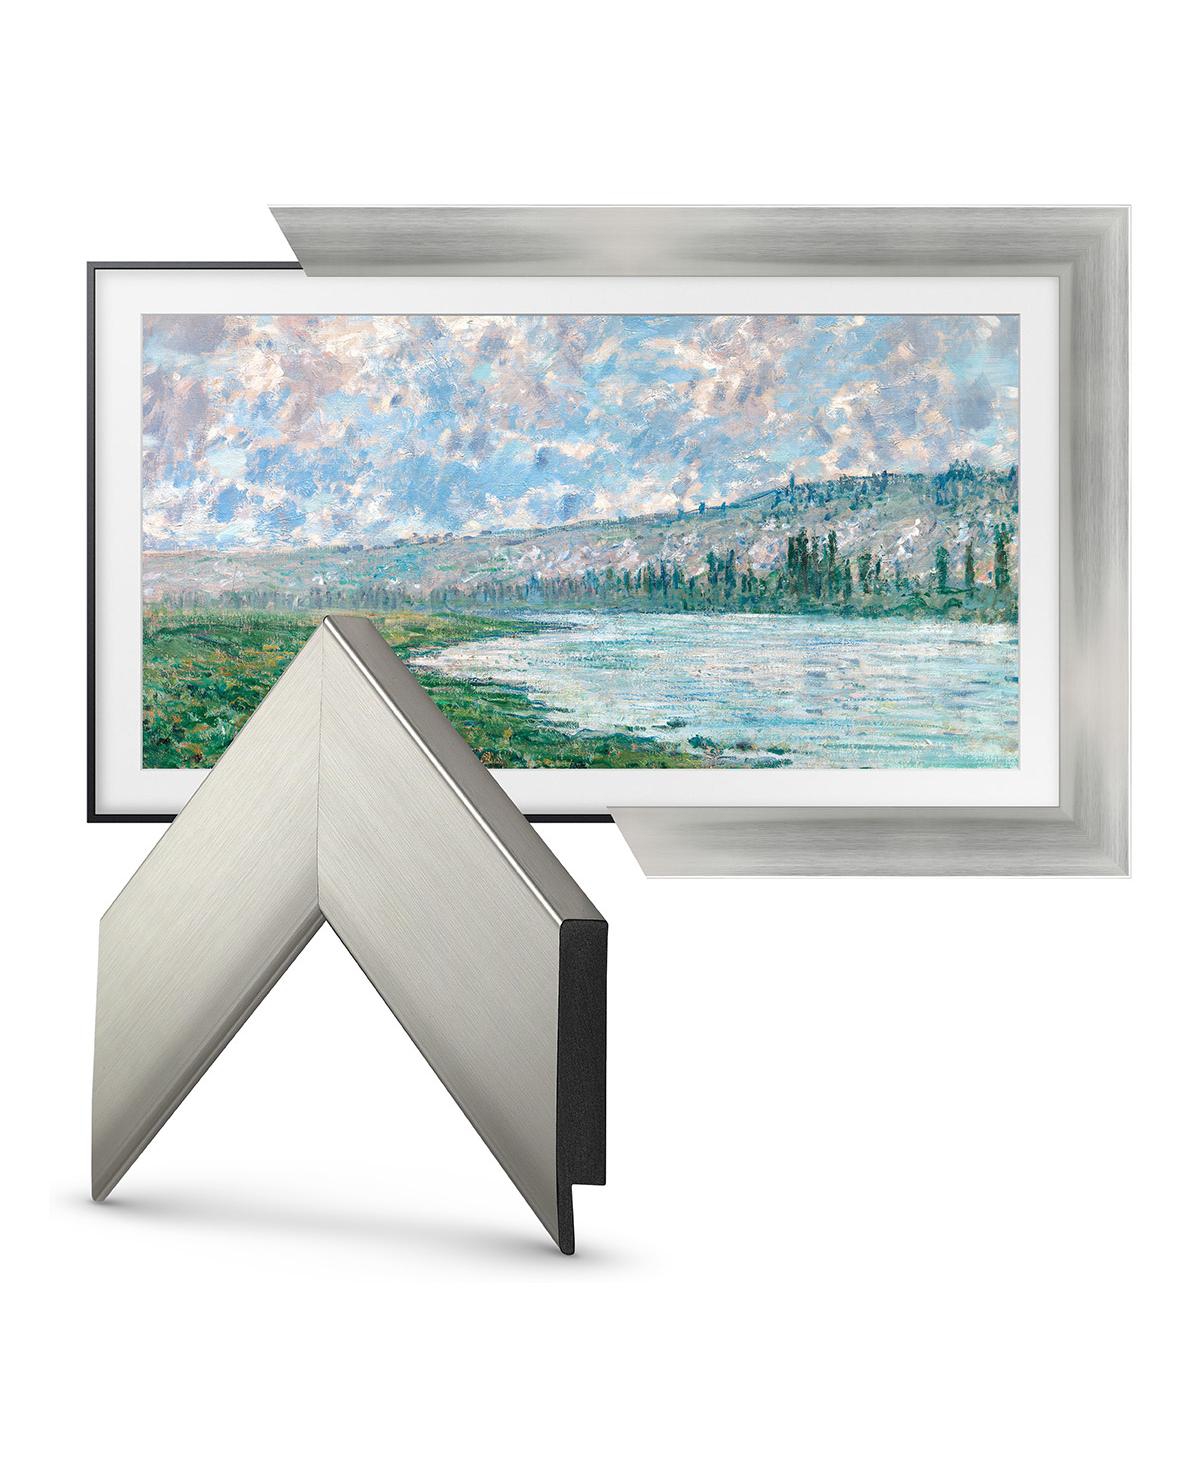 Deco Tv Frames 75" Customizable Frame For Samsung The Frame Tv 2021-2023 In Brushed Stainless